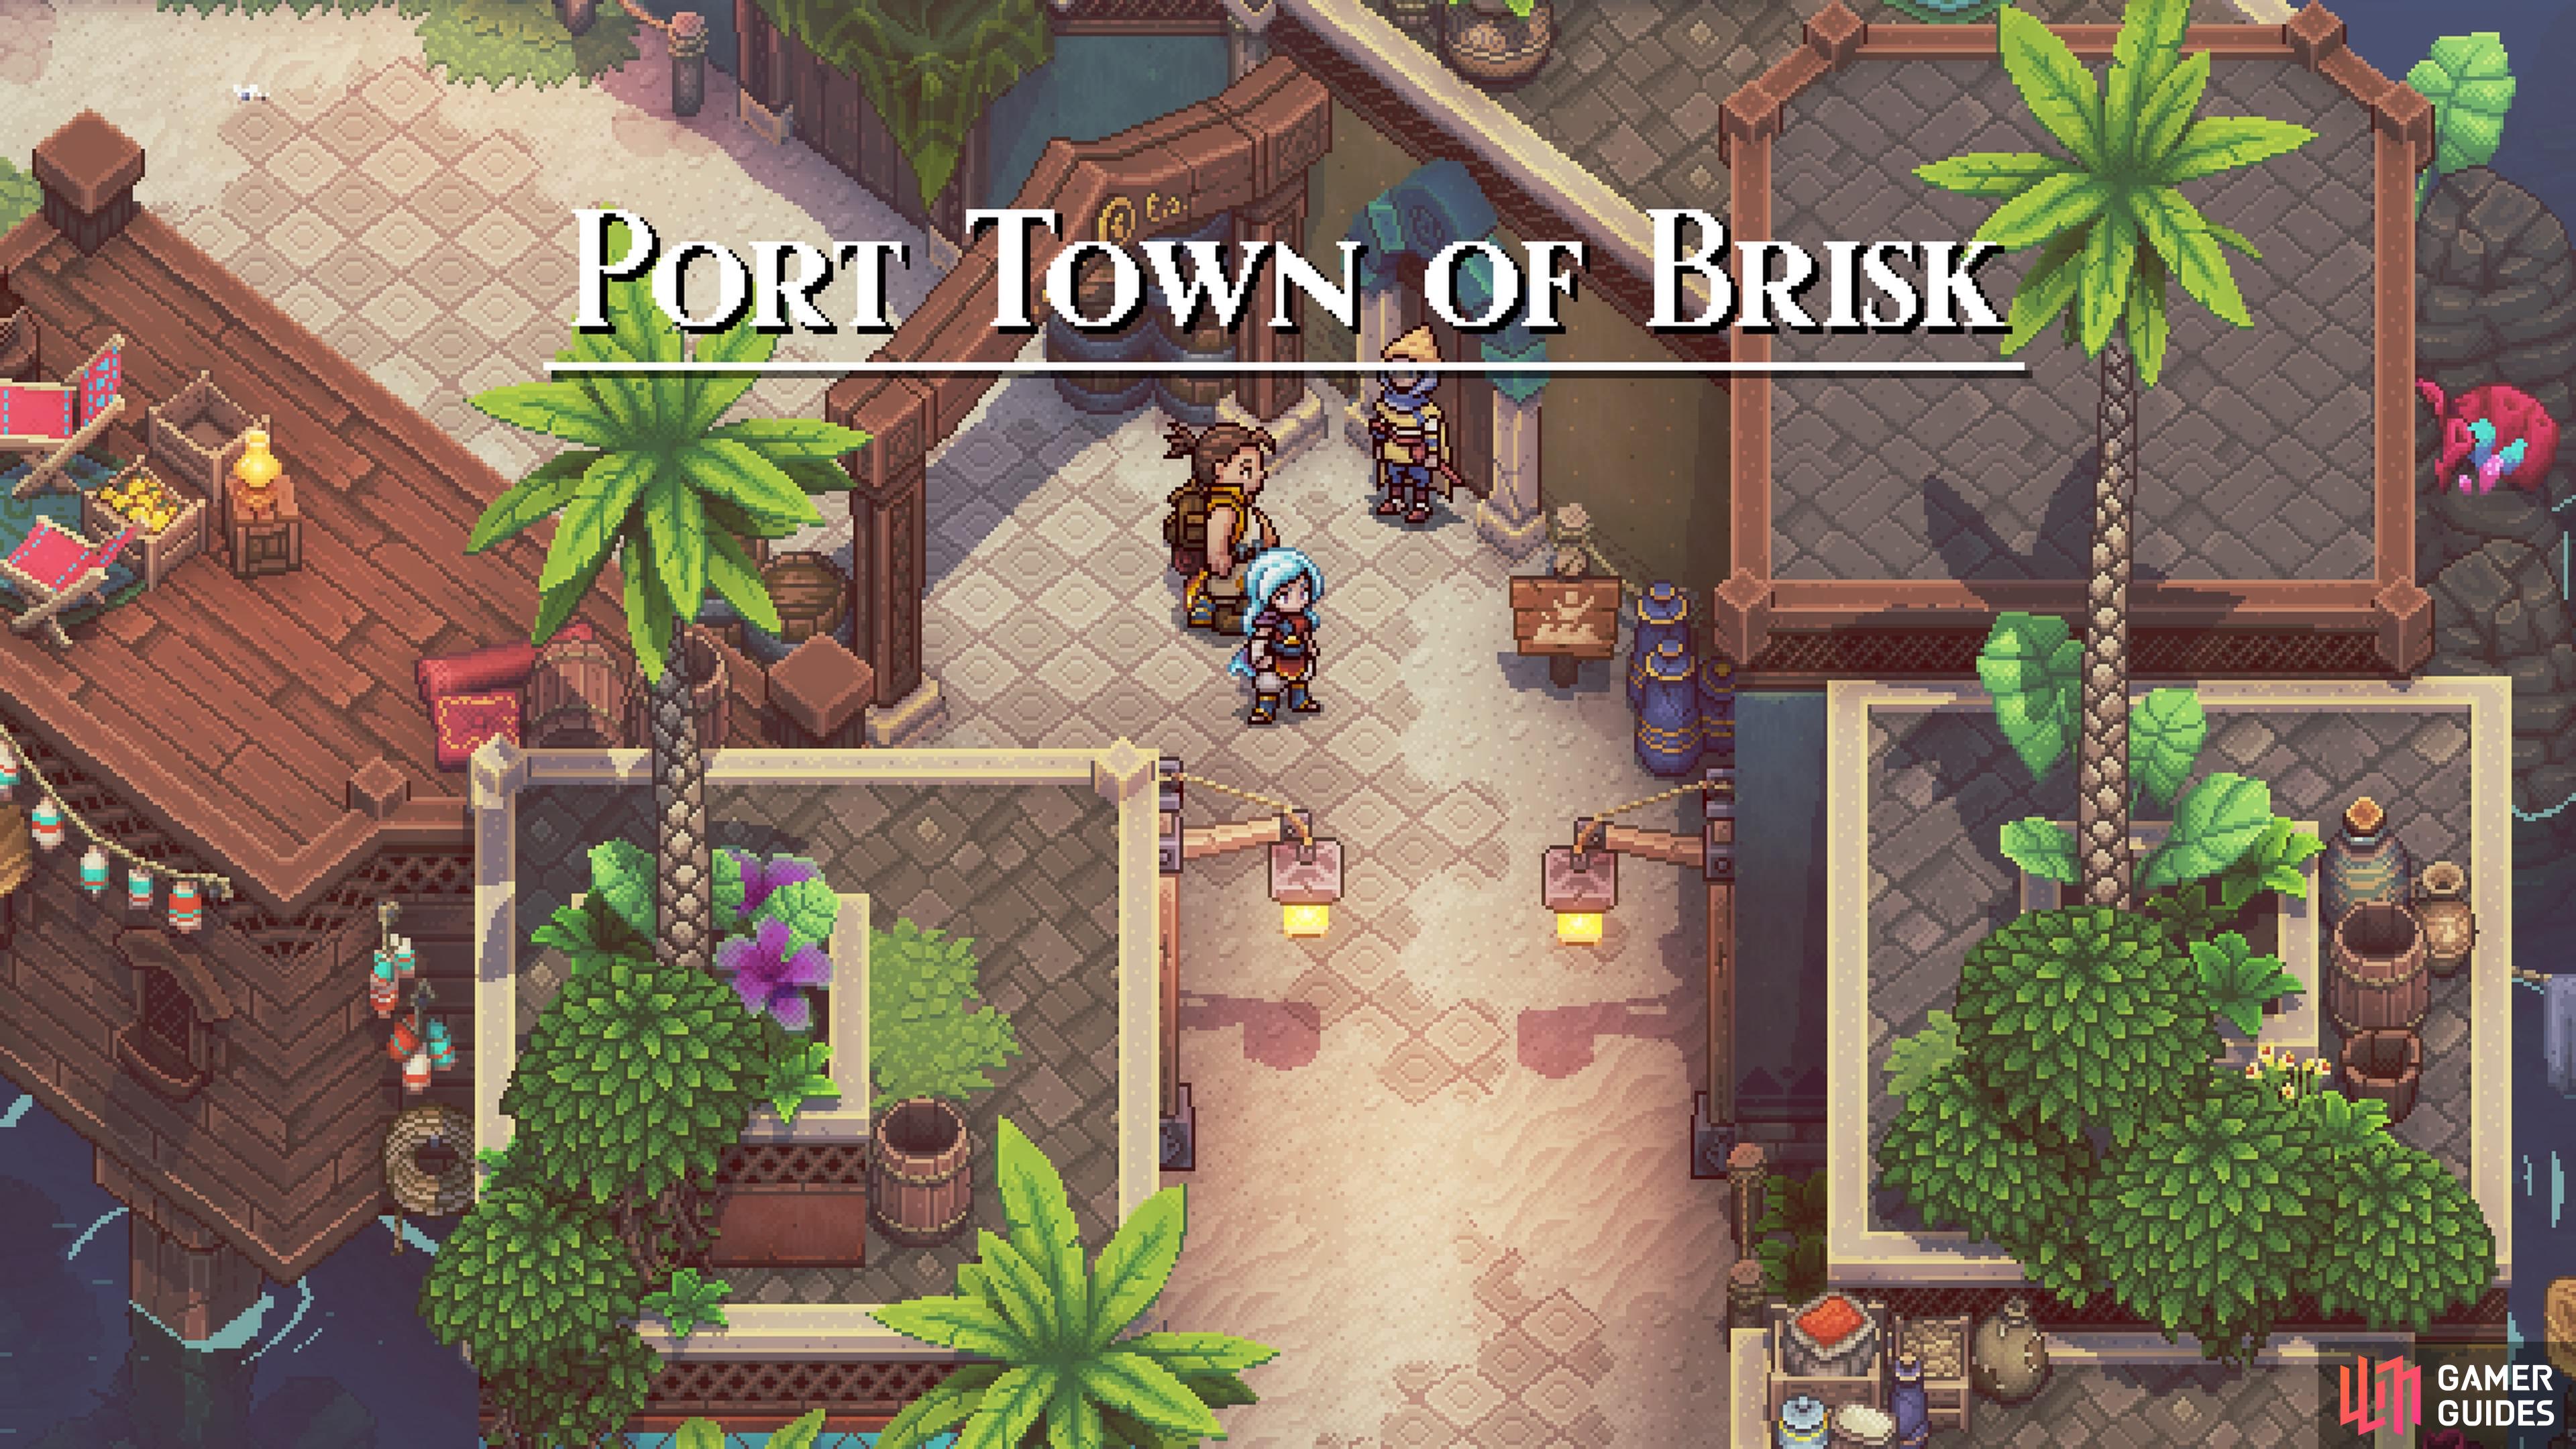 Brisk is the town where you are trying to get your boat to Wraith Island.